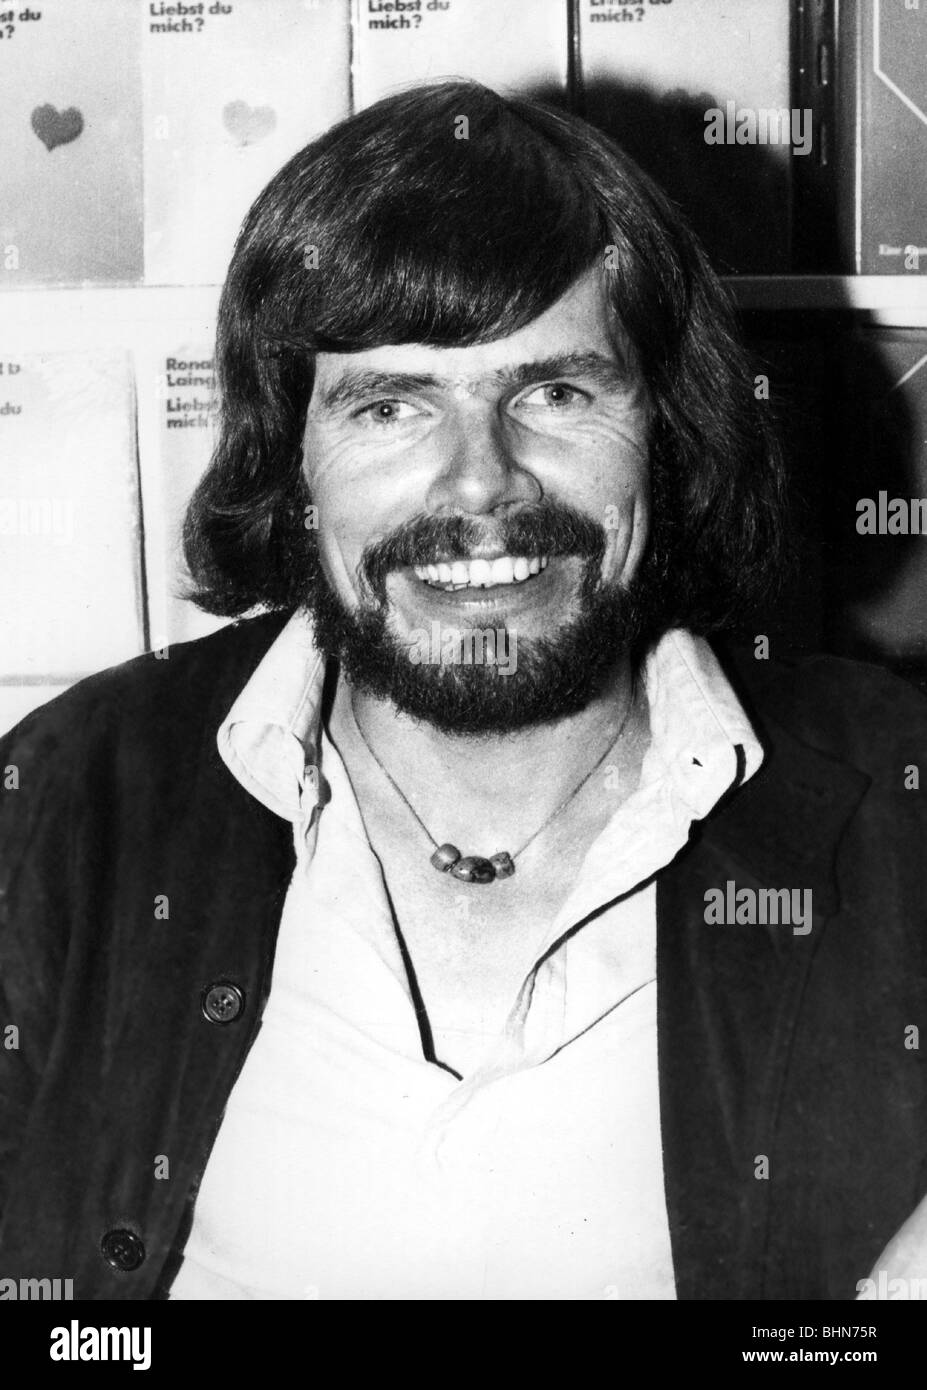 Messner reinhold Black and White Stock Photos & Images - Alamy